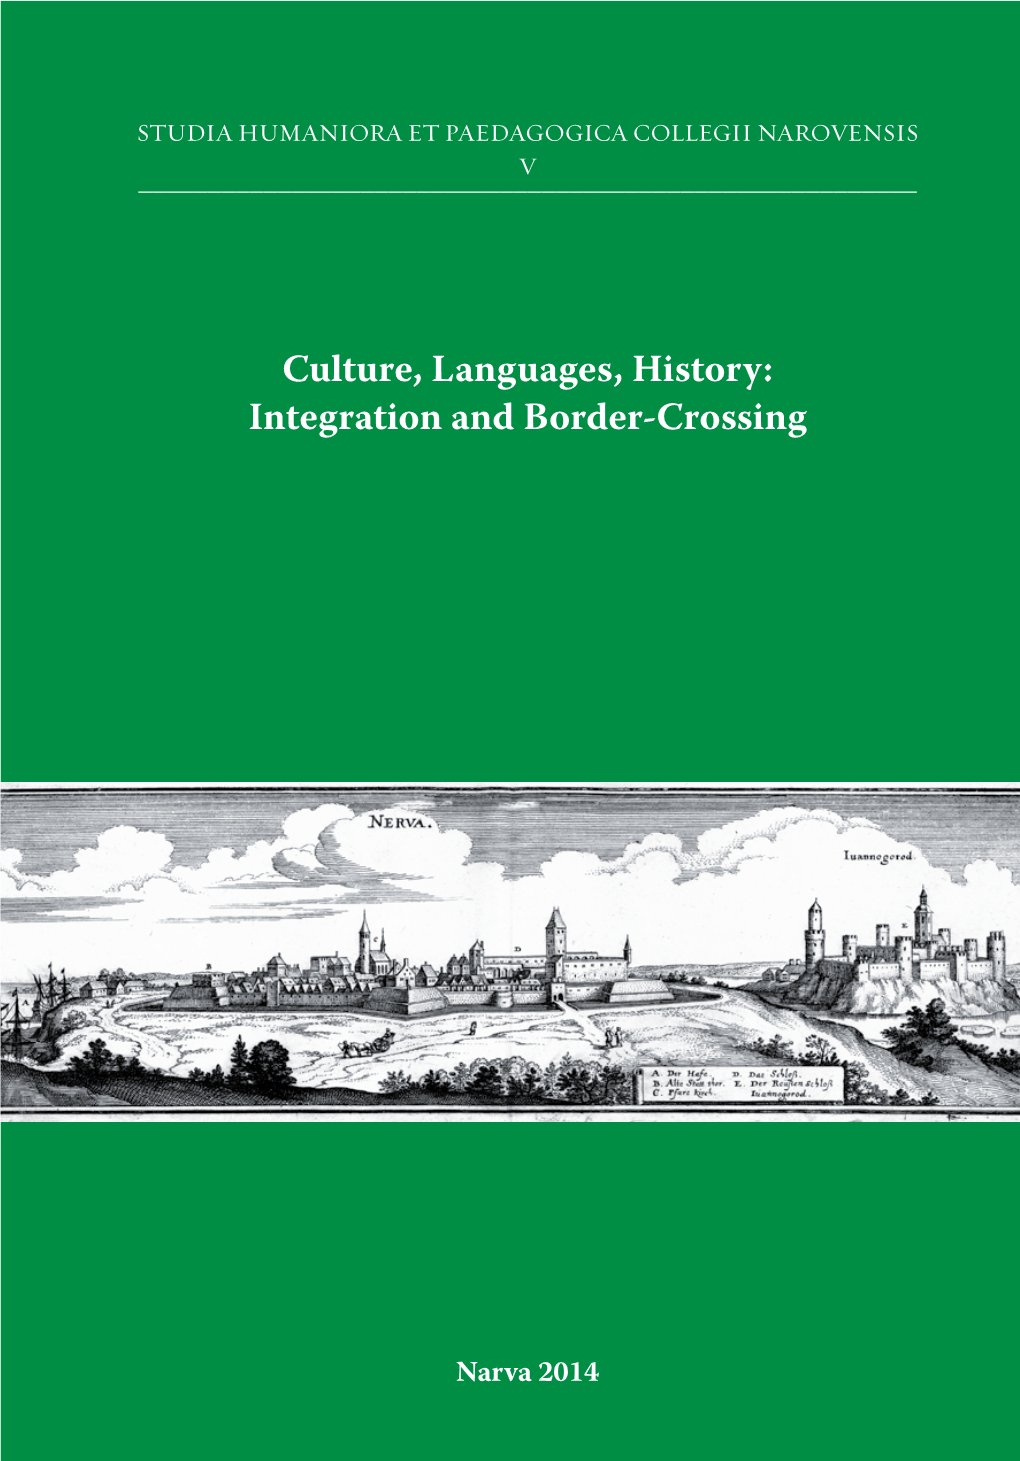 Culture, Languages, History: Integration and Border-Crossing